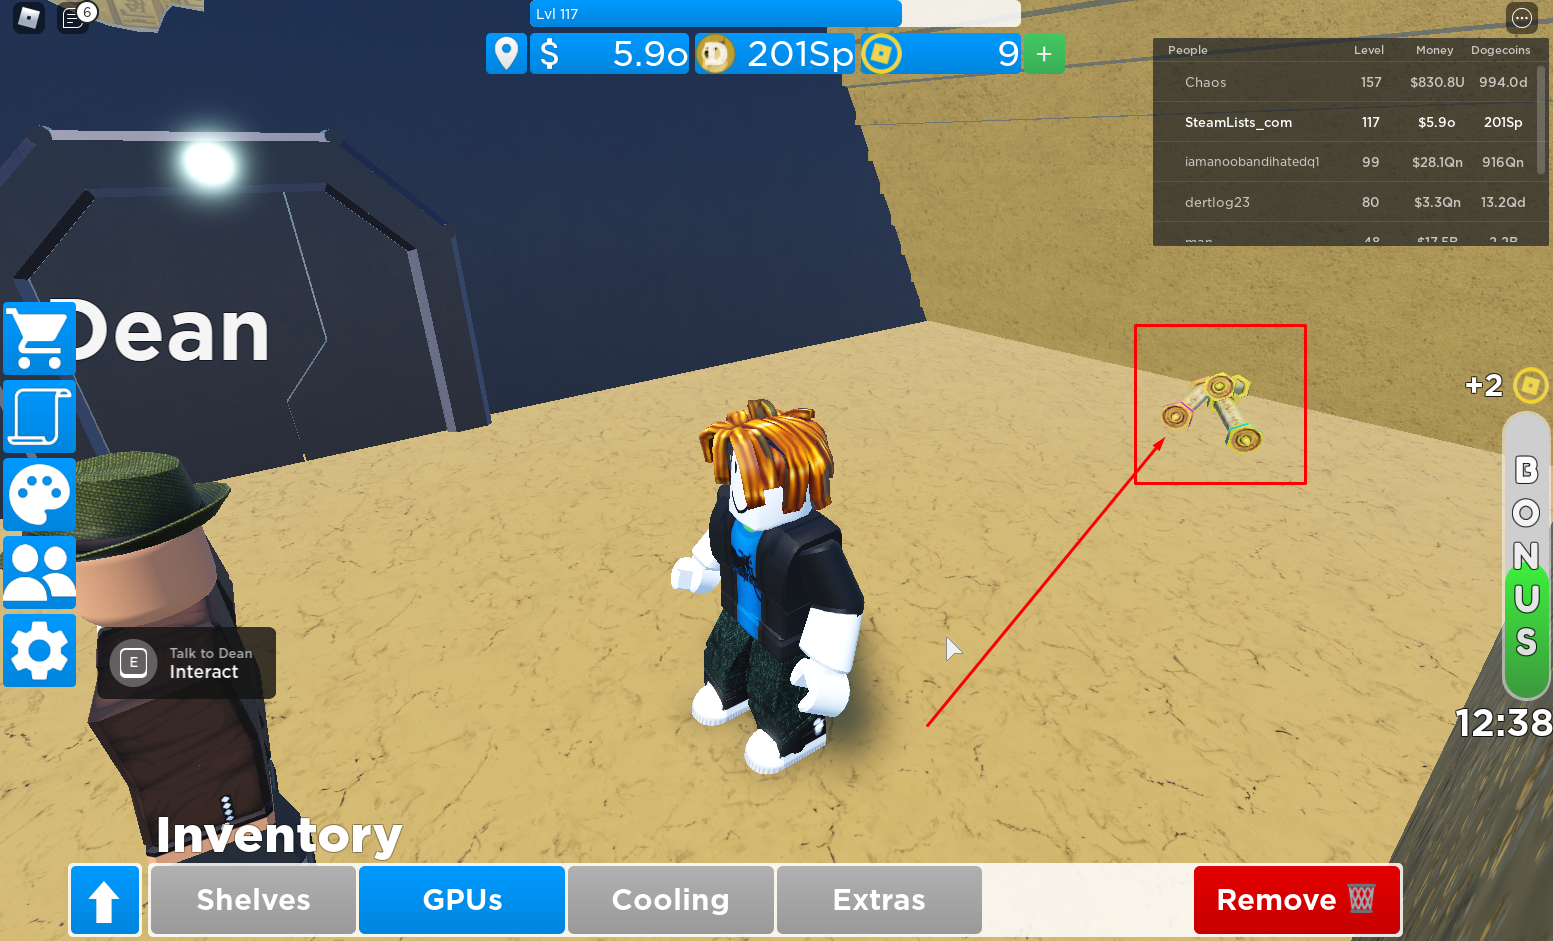 Roblox – Dogecoin Mining Tycoon where is Enchantment Scrolls location? 1 - steamlists.com